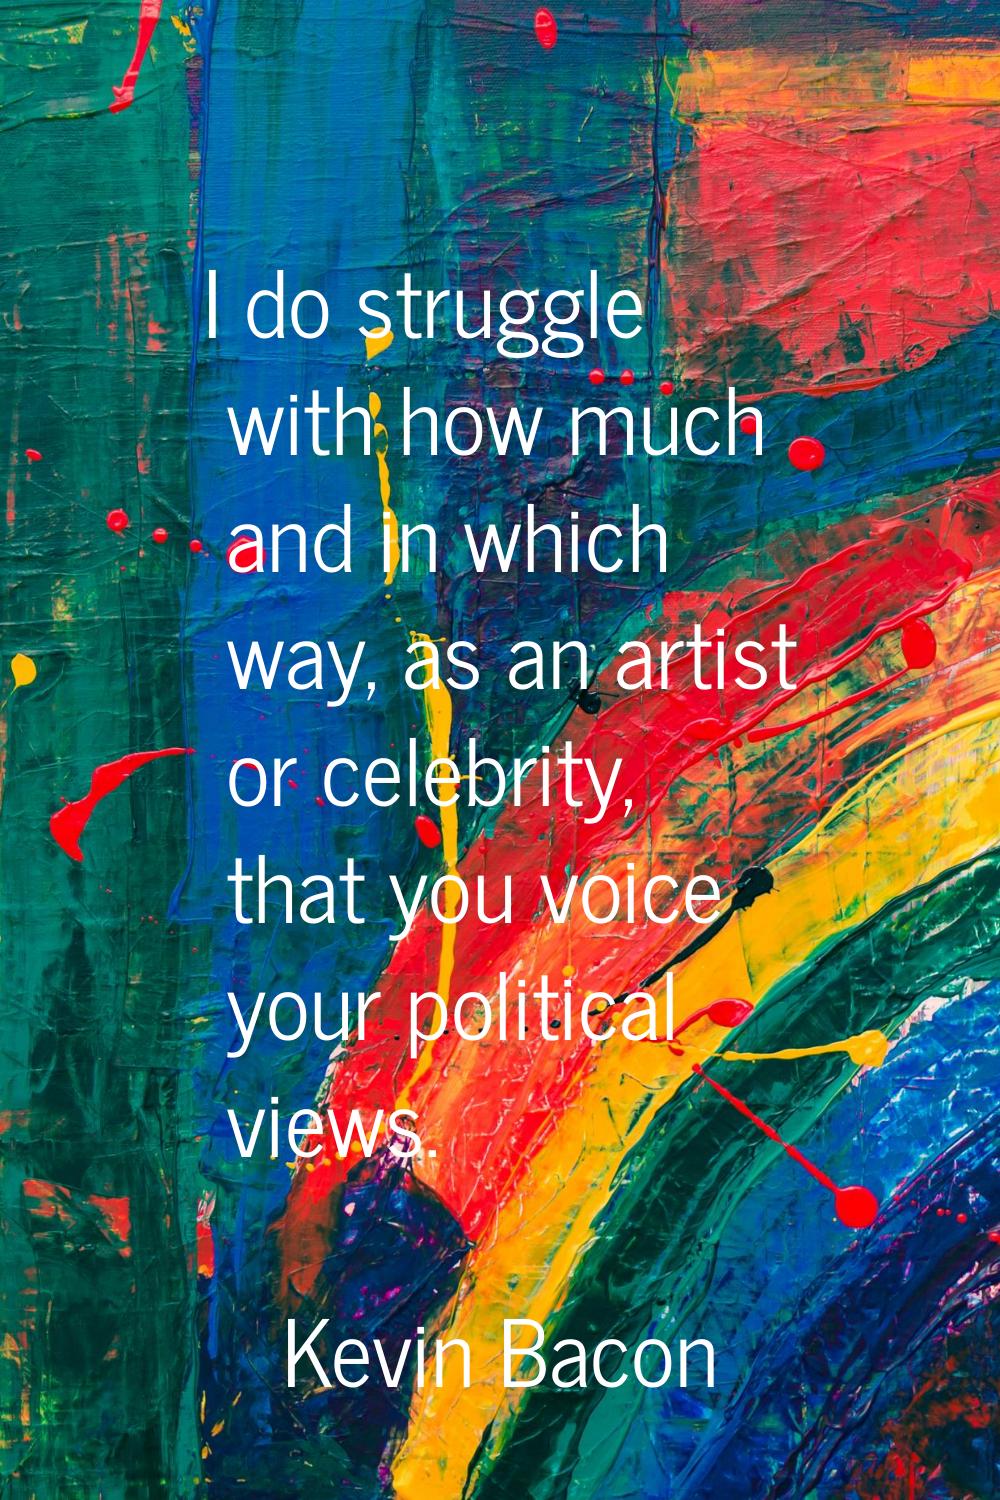 I do struggle with how much and in which way, as an artist or celebrity, that you voice your politi